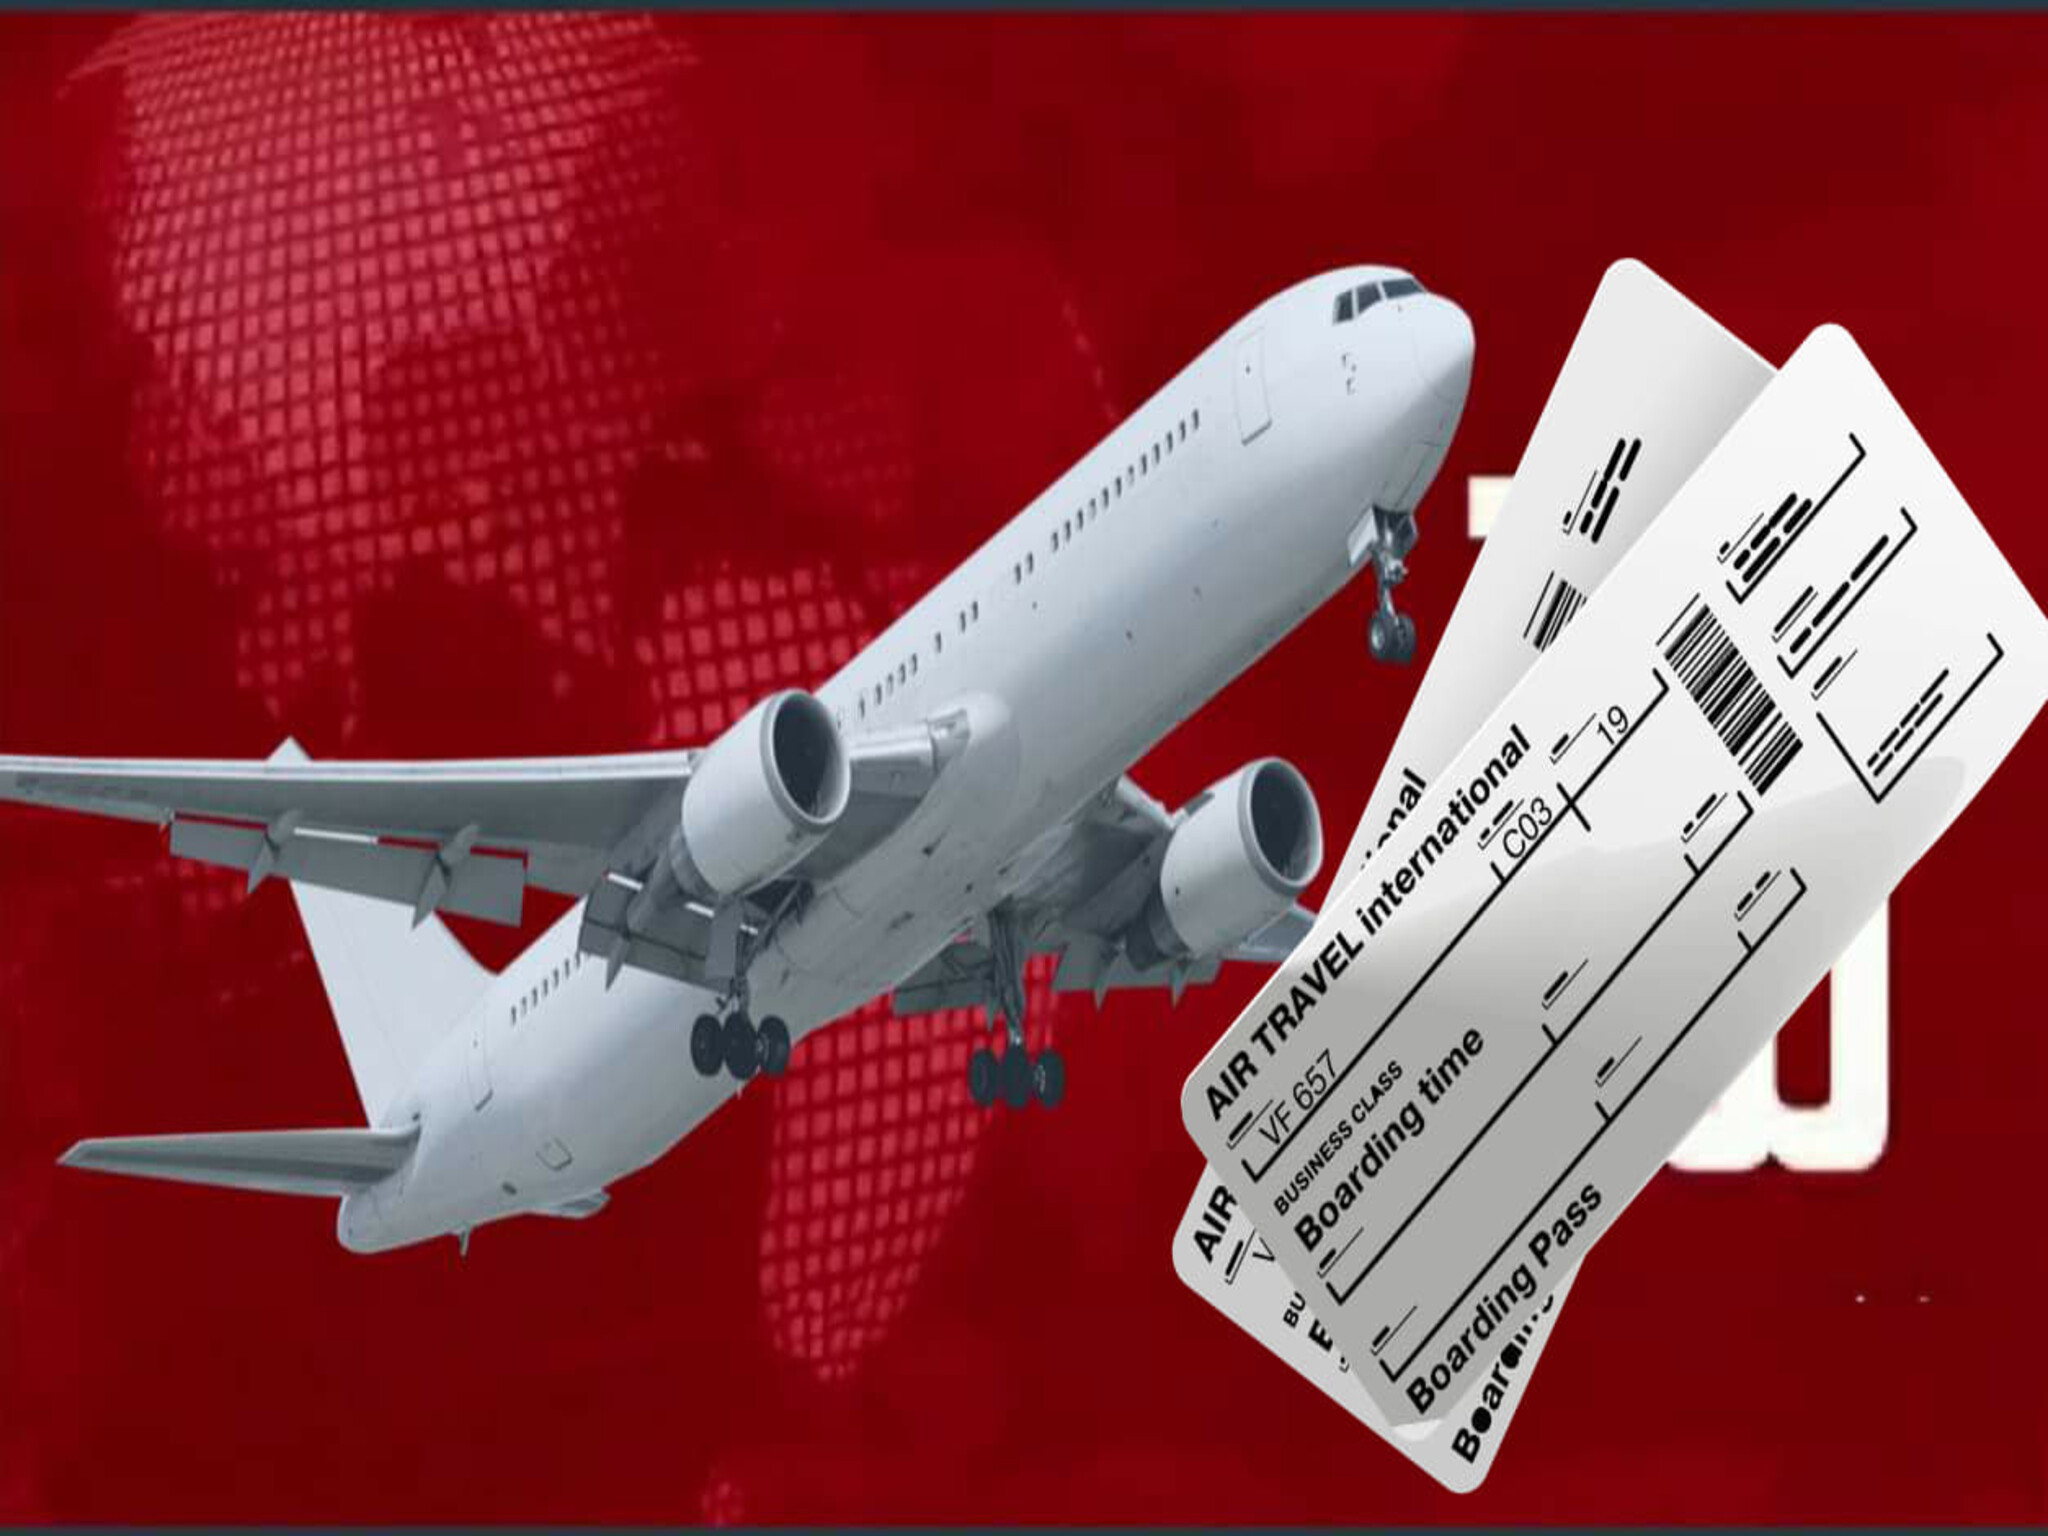 A free flight ticket for a resident of the UAE to spend the Eid Al-Fitr holiday at home